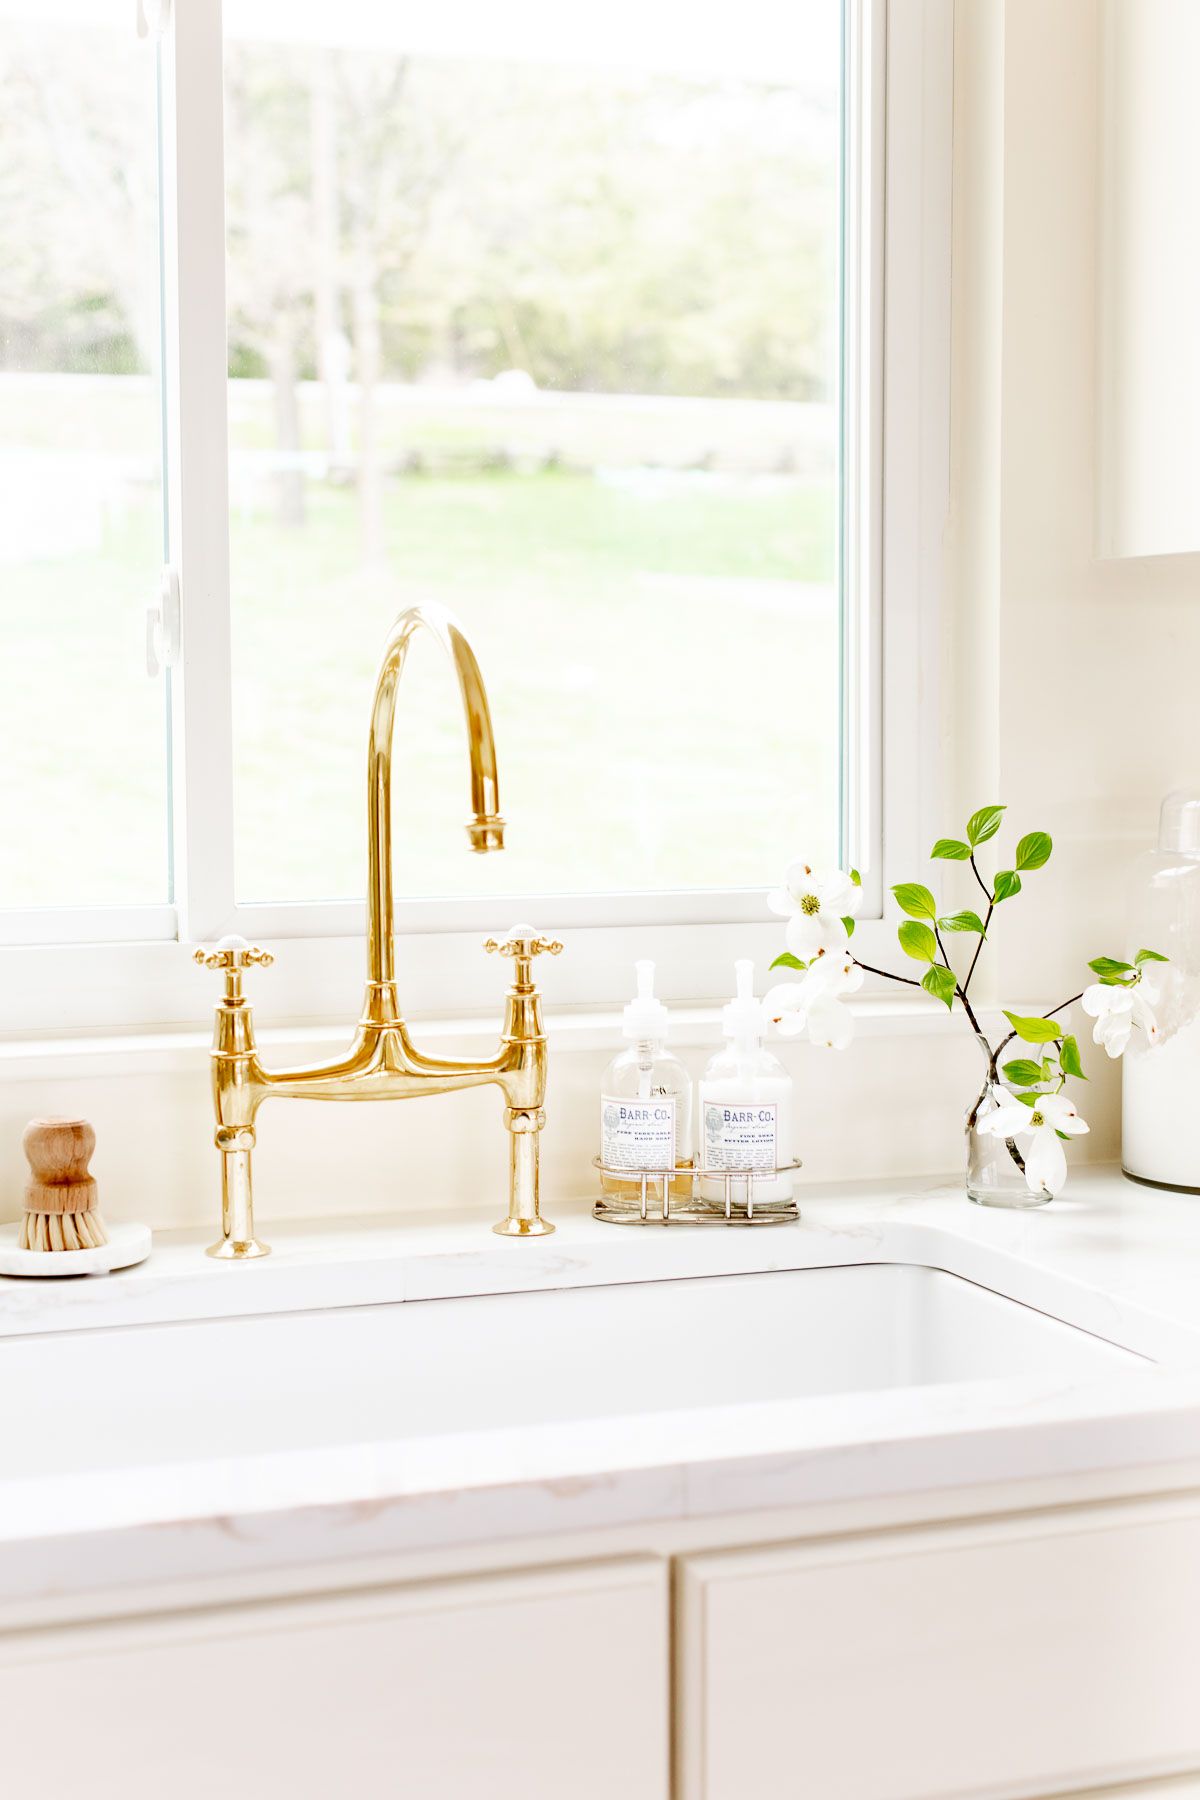 A white quartz countertop with an eased countertop edge, brass faucet on the sink.